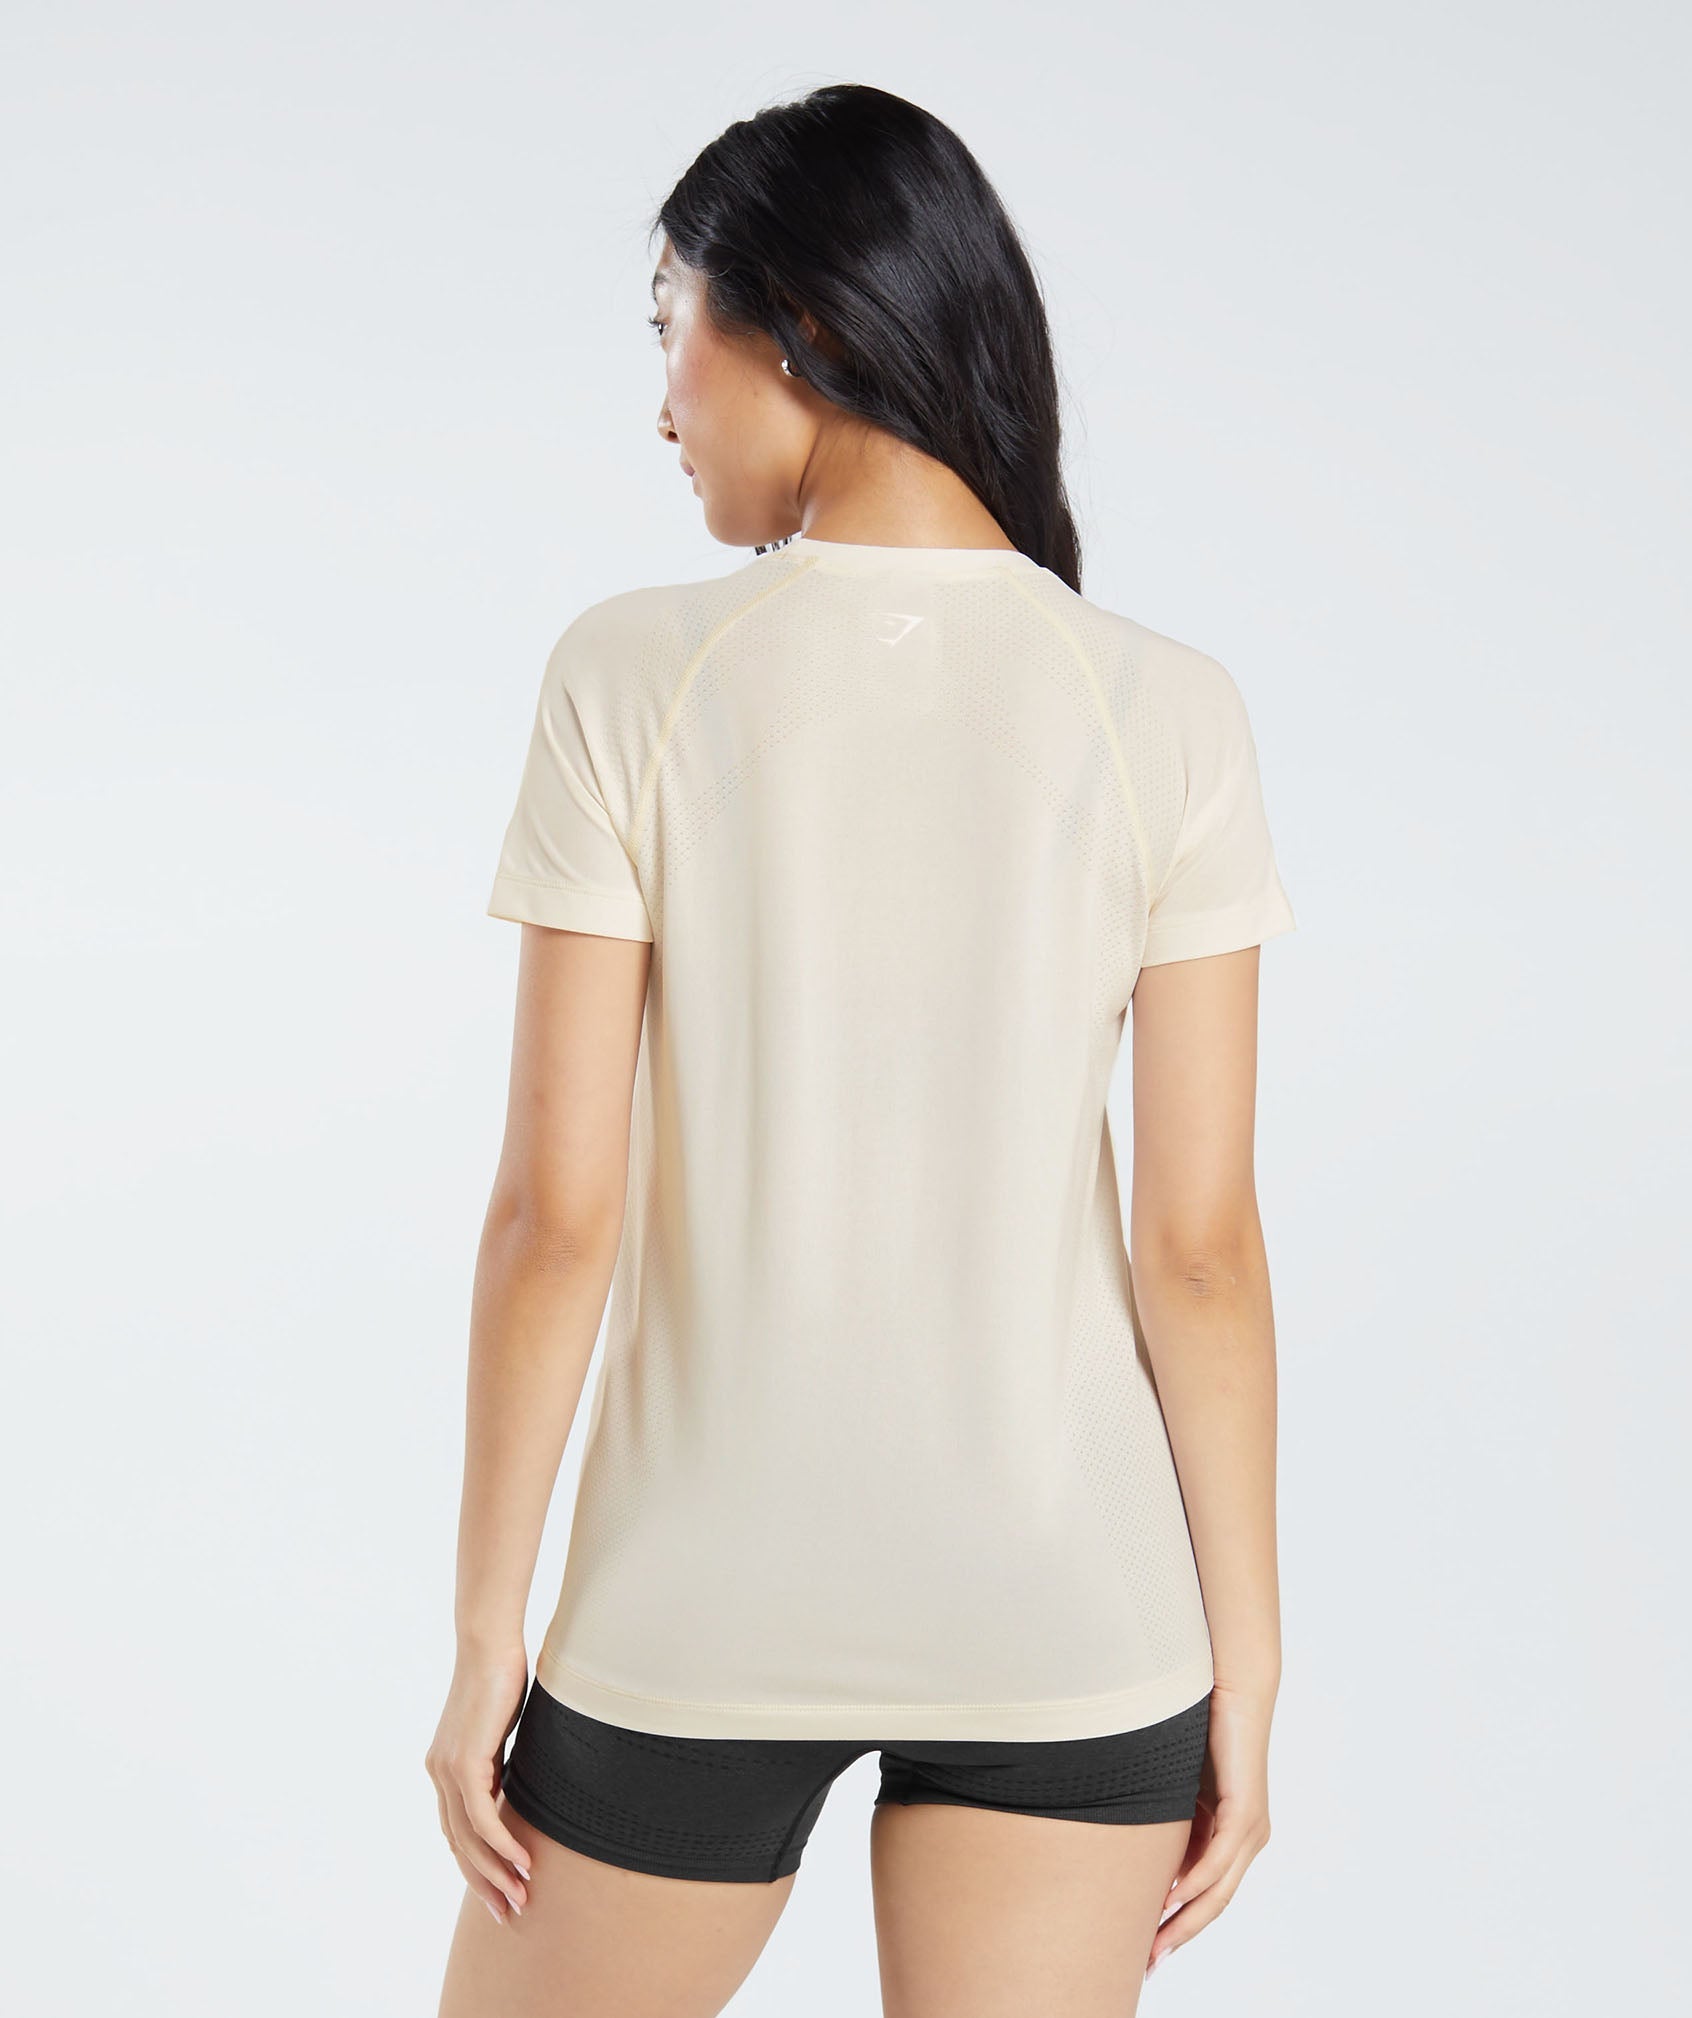 Vital Seamless 2.0 Light T-Shirt in Coconut White Marl - view 2